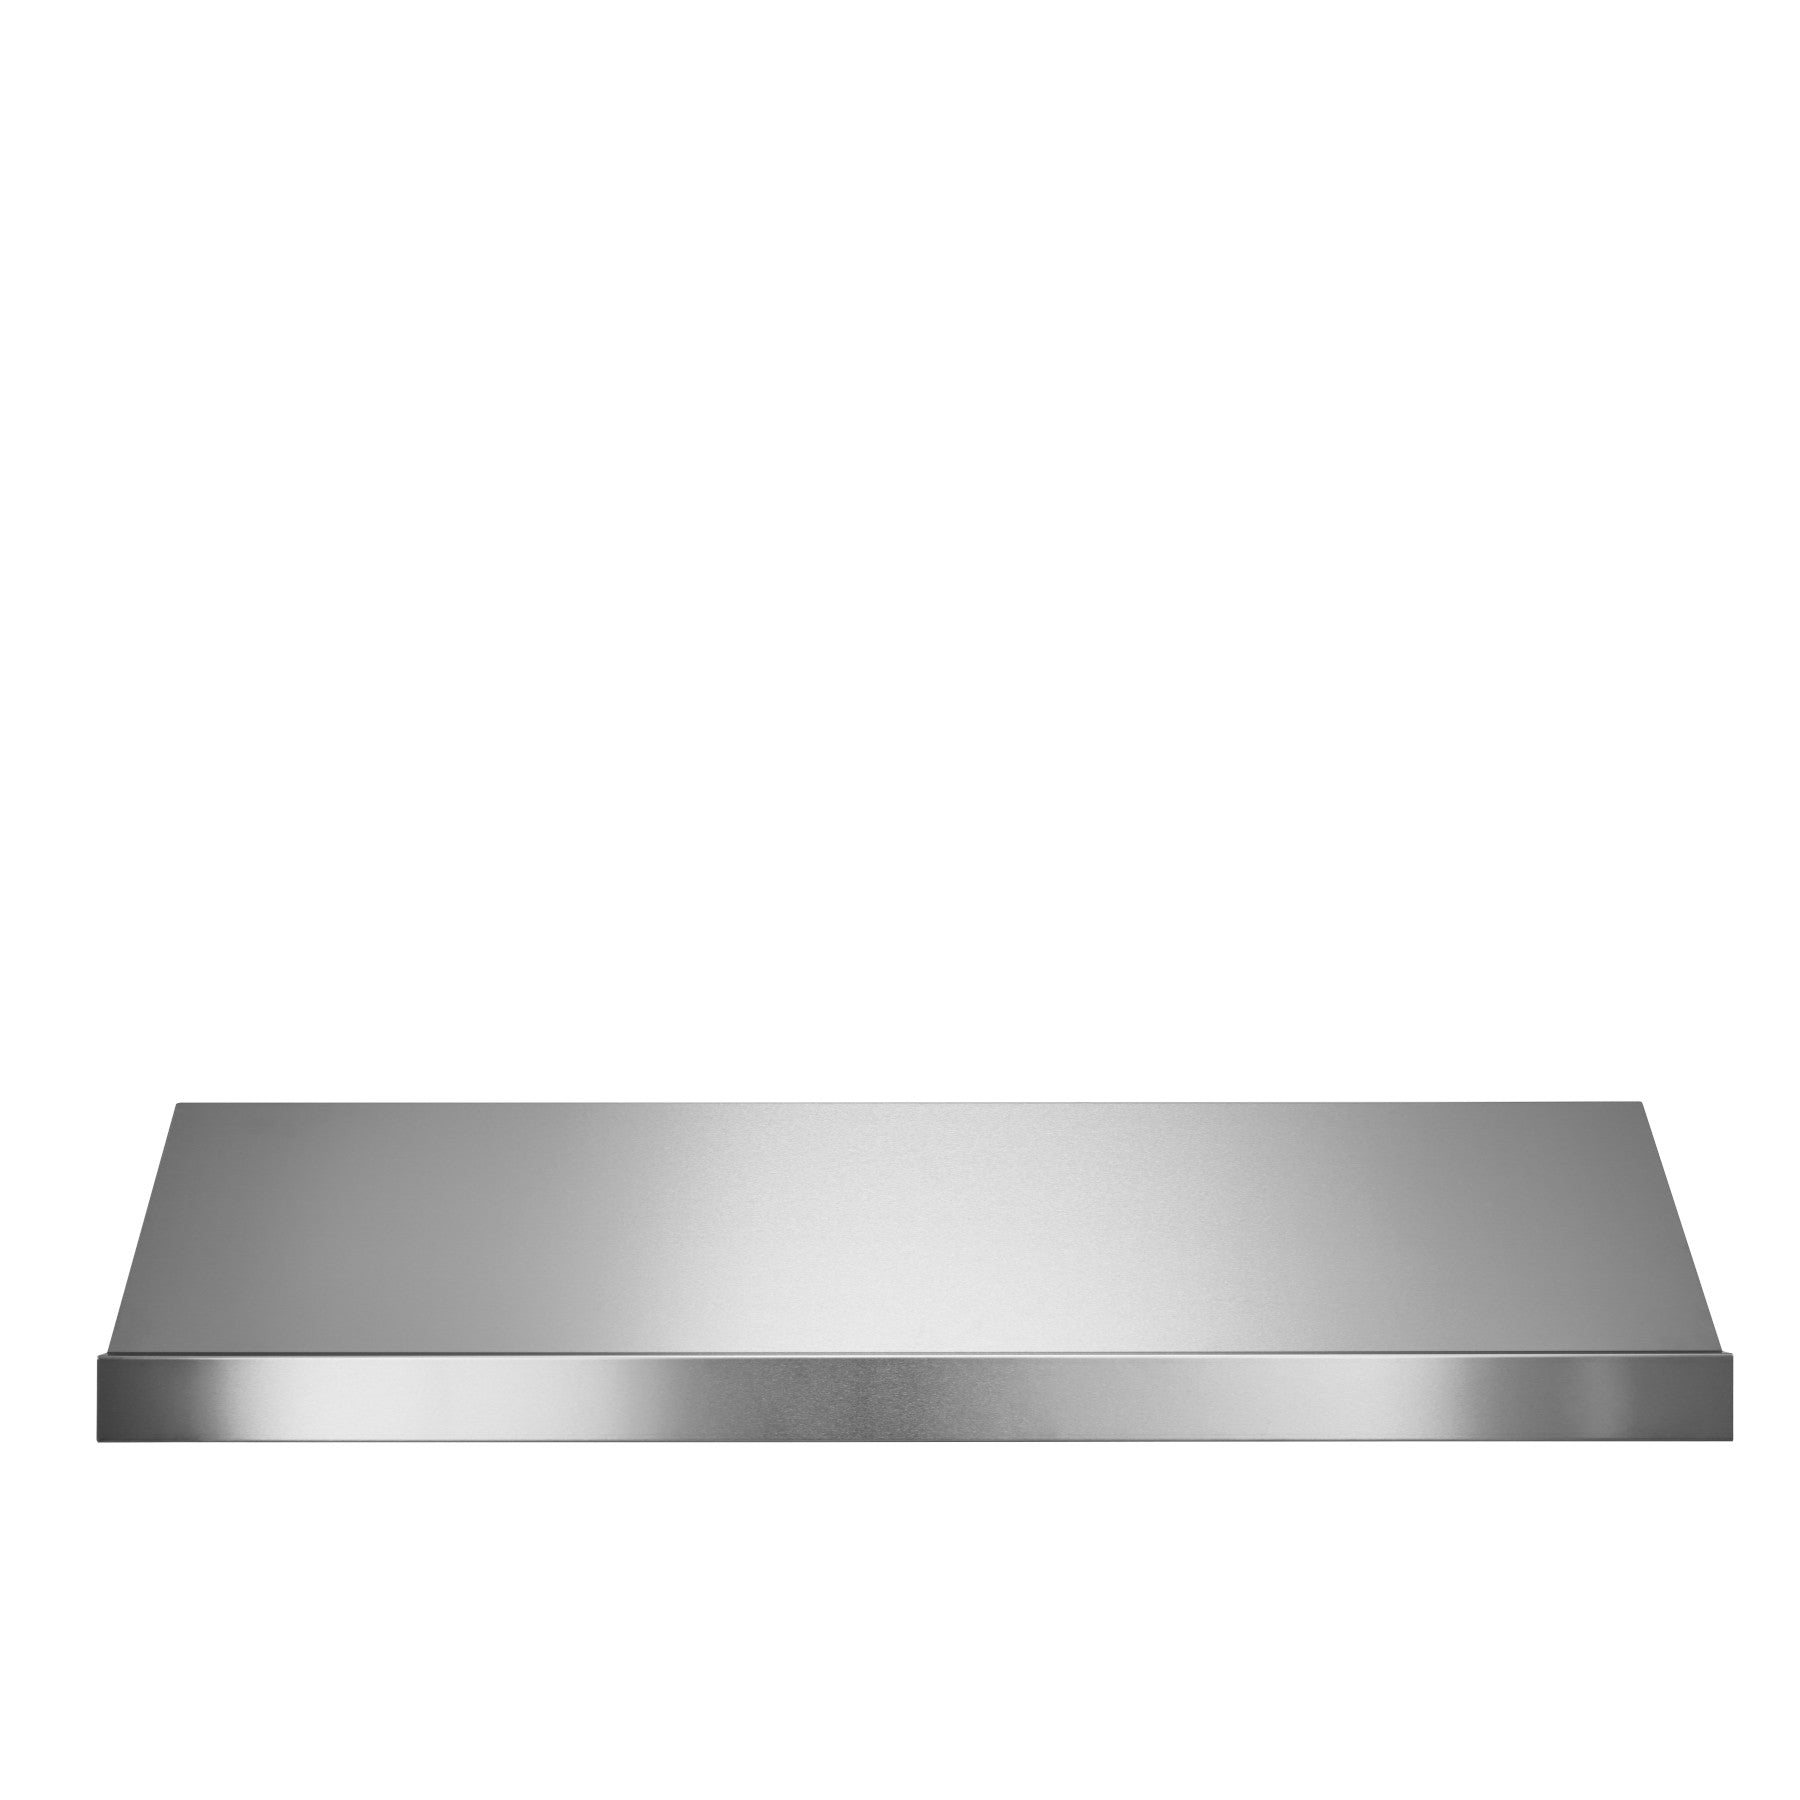 Best - 42 Inch Under Cabinet Range Vent in Stainless - UP26M42SB